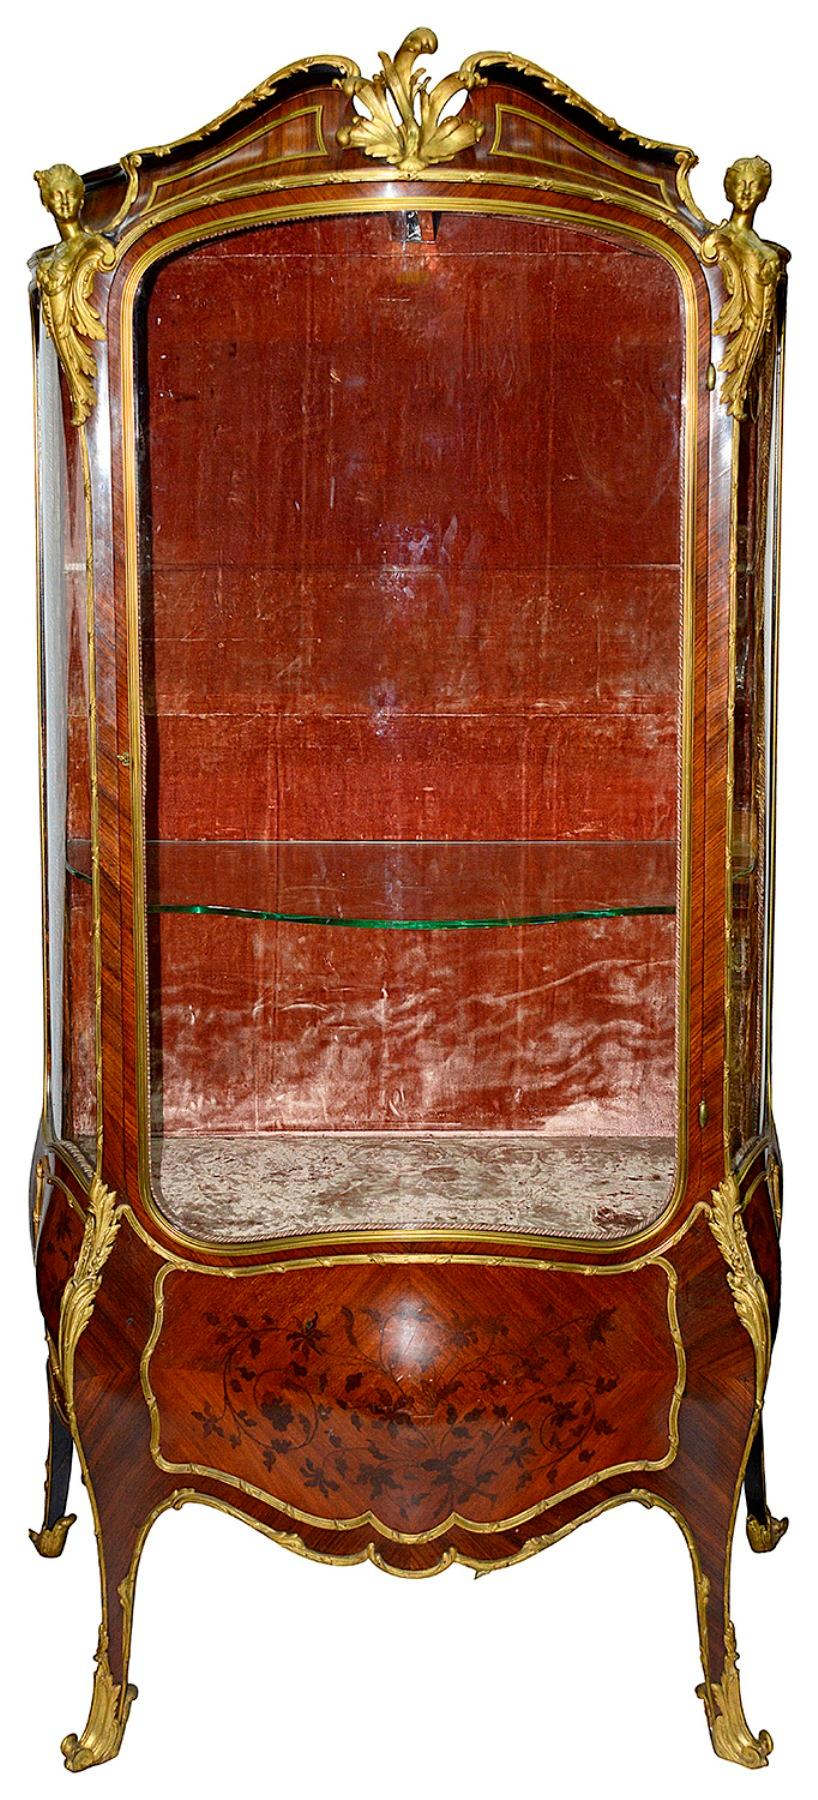 Fine quality French Louis XVI style Linke influence Vitrine, circa 1890. Having wonderful gilded ormolu monopodia mounts, serpentine front and sides, with shaped glass, inlaid floral decoration to the single door, when opened reveals glass shelves